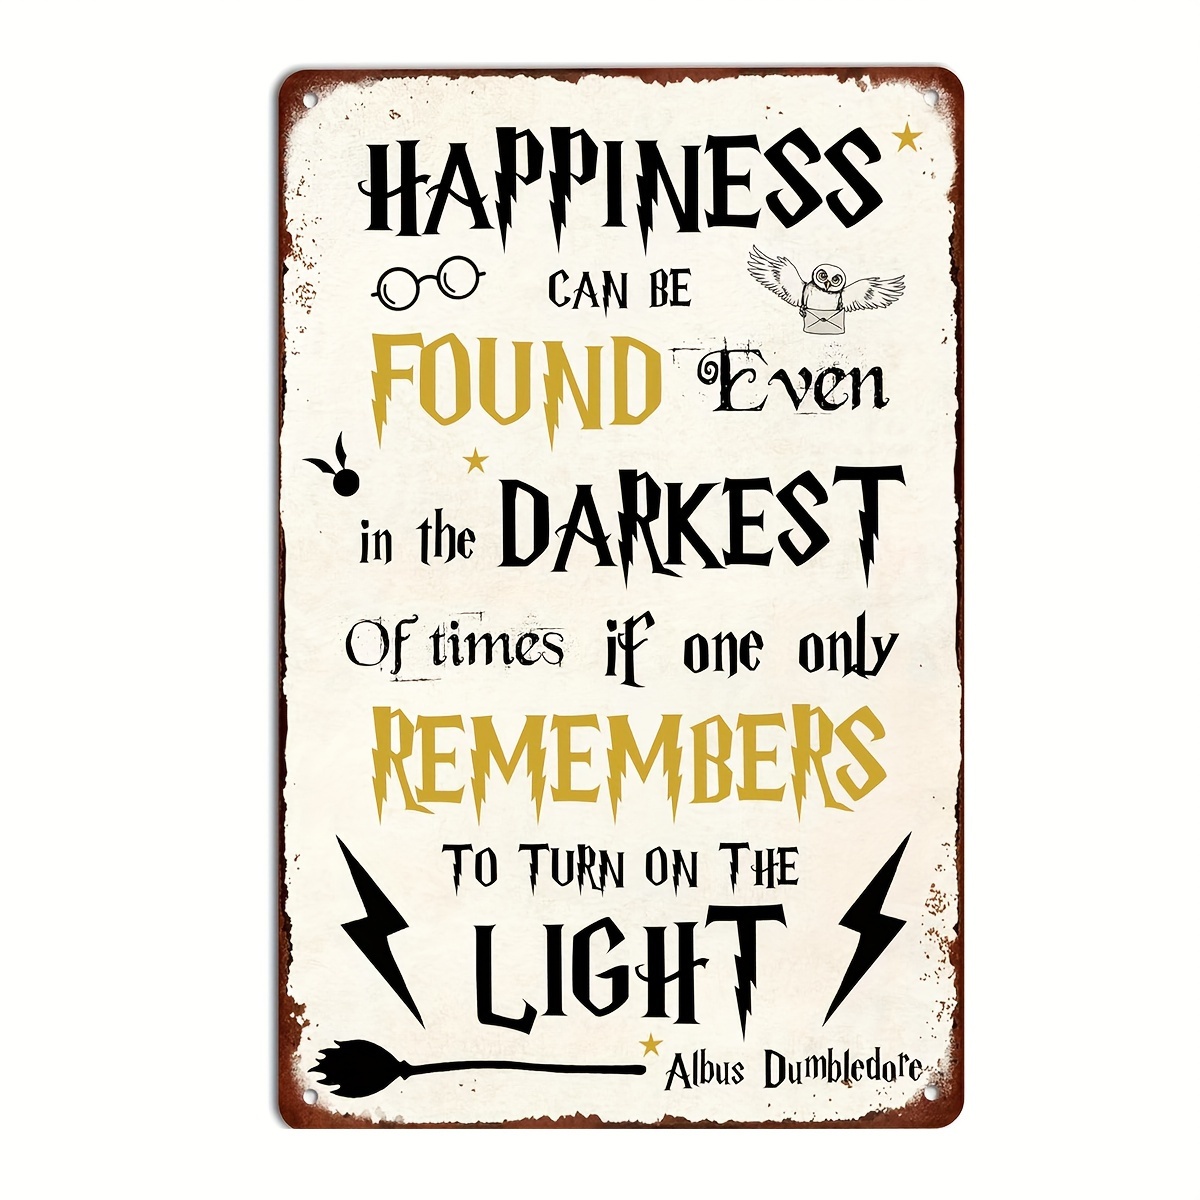 

Vintage Magic 'happiness Can Be Found Even In The Darkest' Metal Tin Sign - Perfect For Man Caves, Pubs, Bedrooms & Living Rooms - Wizard Theme Wall Decor, 8x12 Inch